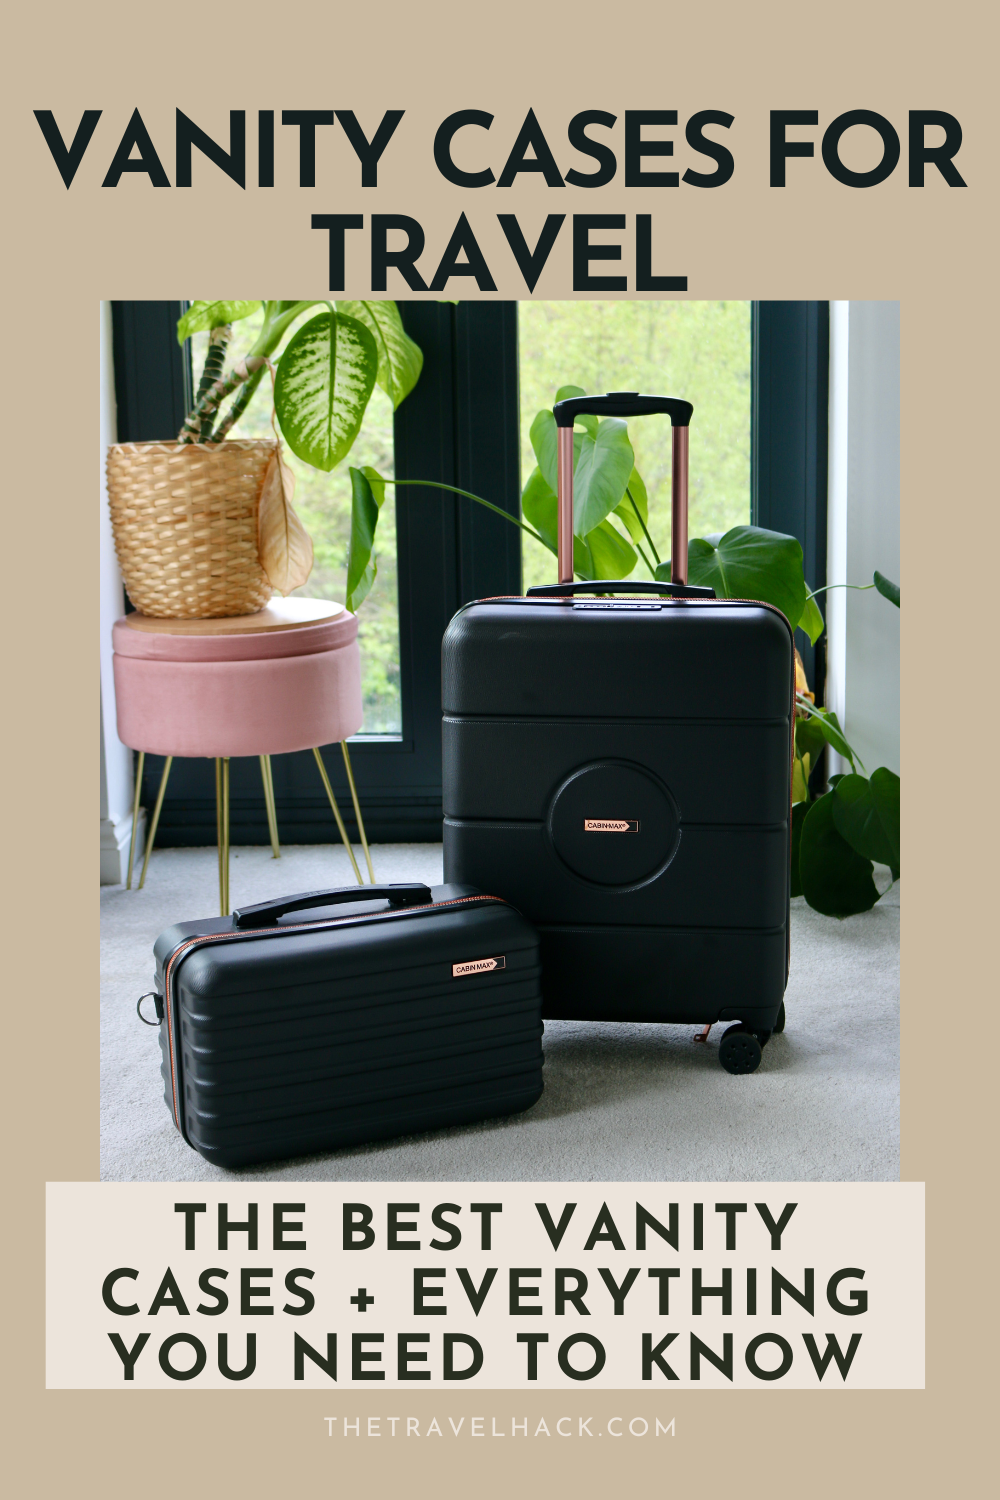 Vanity cases for travel: The best vanity cases + everything you need to know